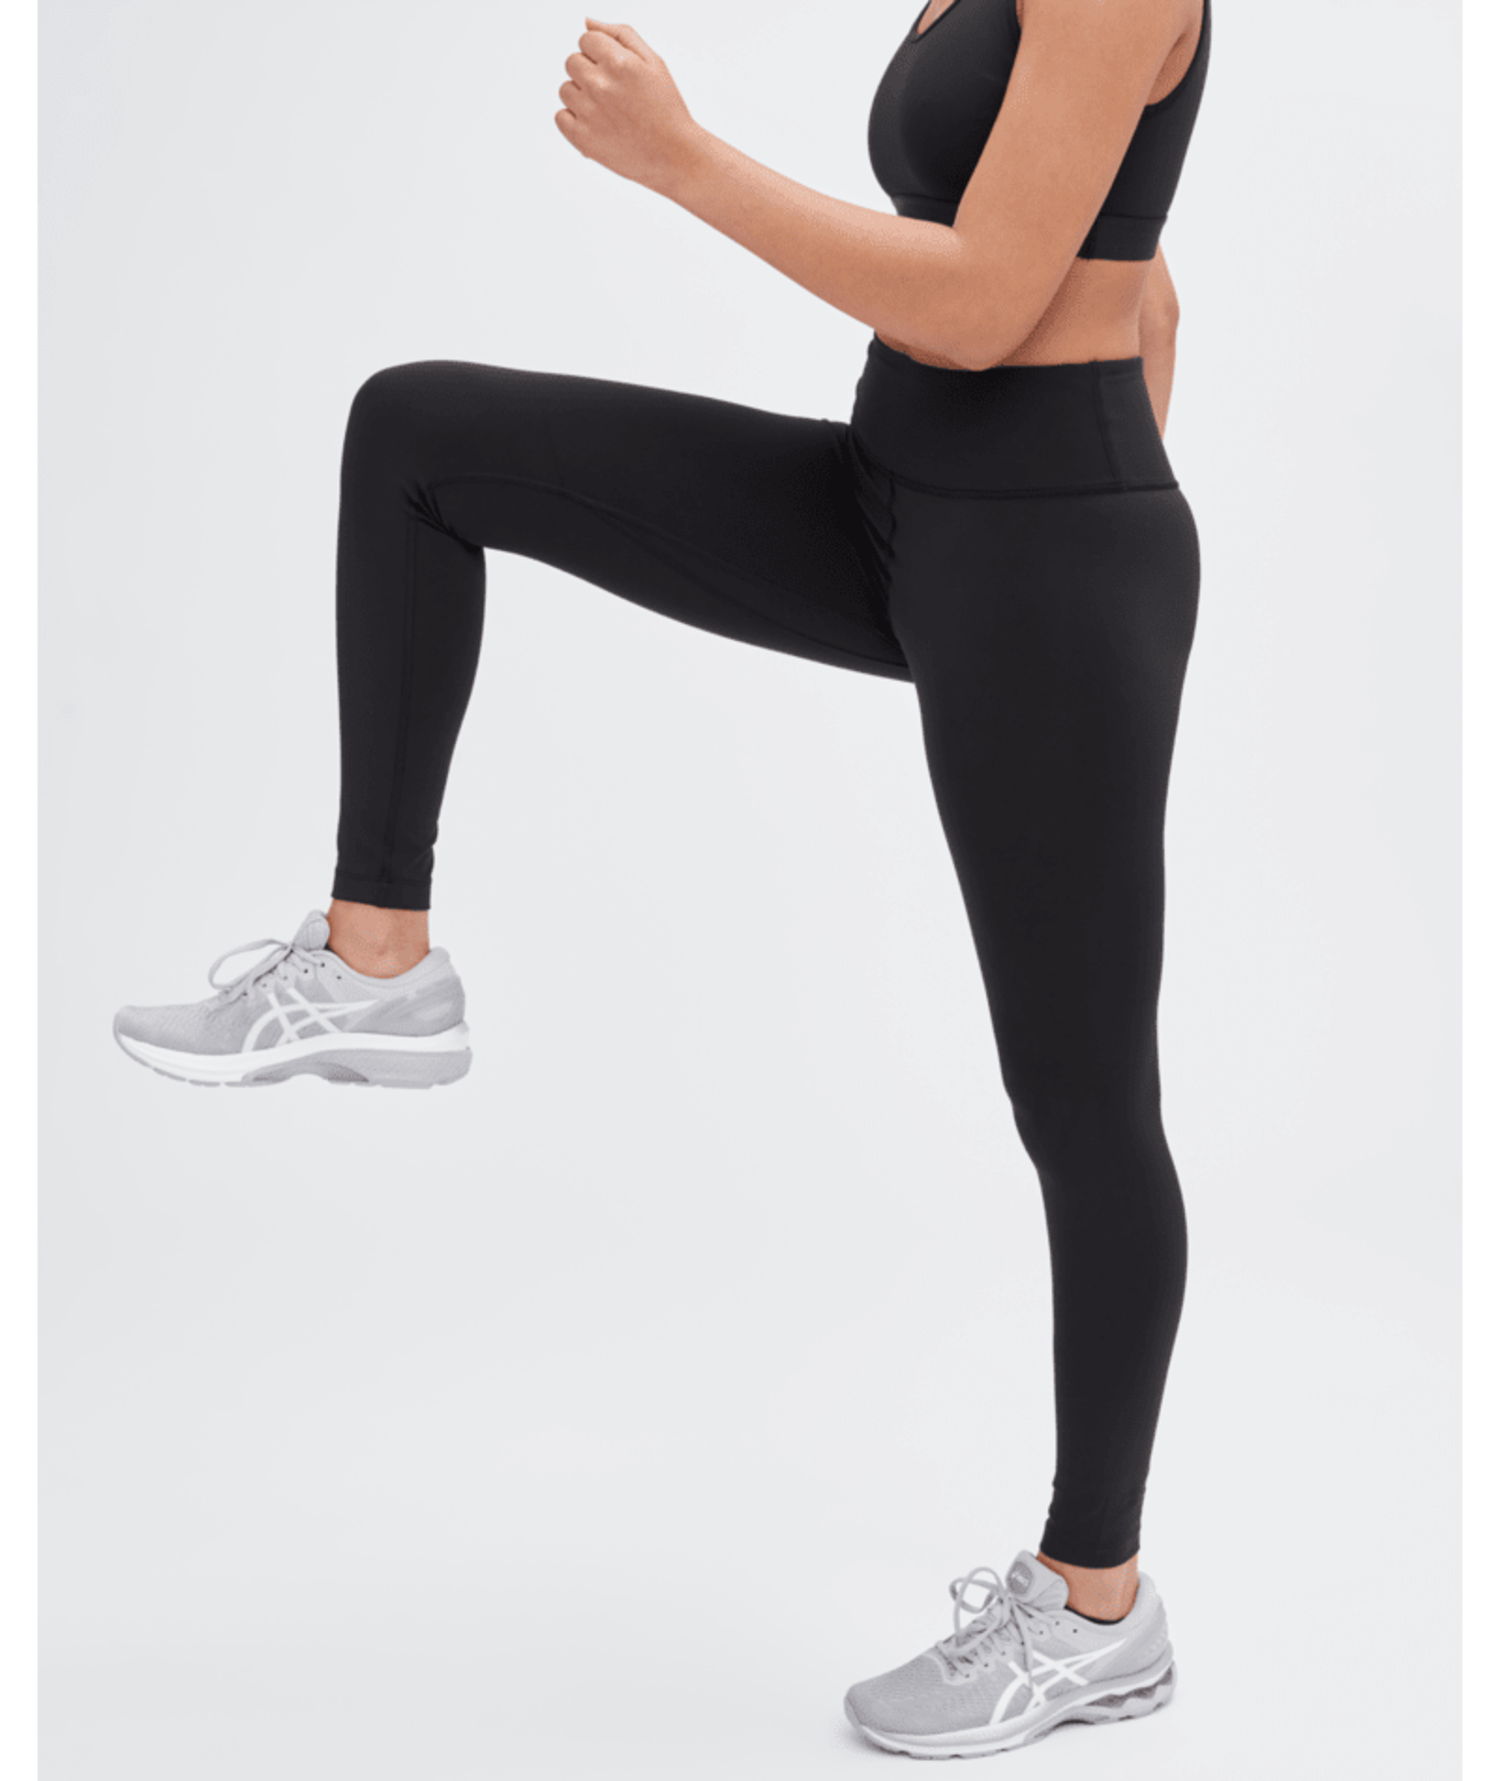 In Motion High Rise Legging by Tentree in Black at